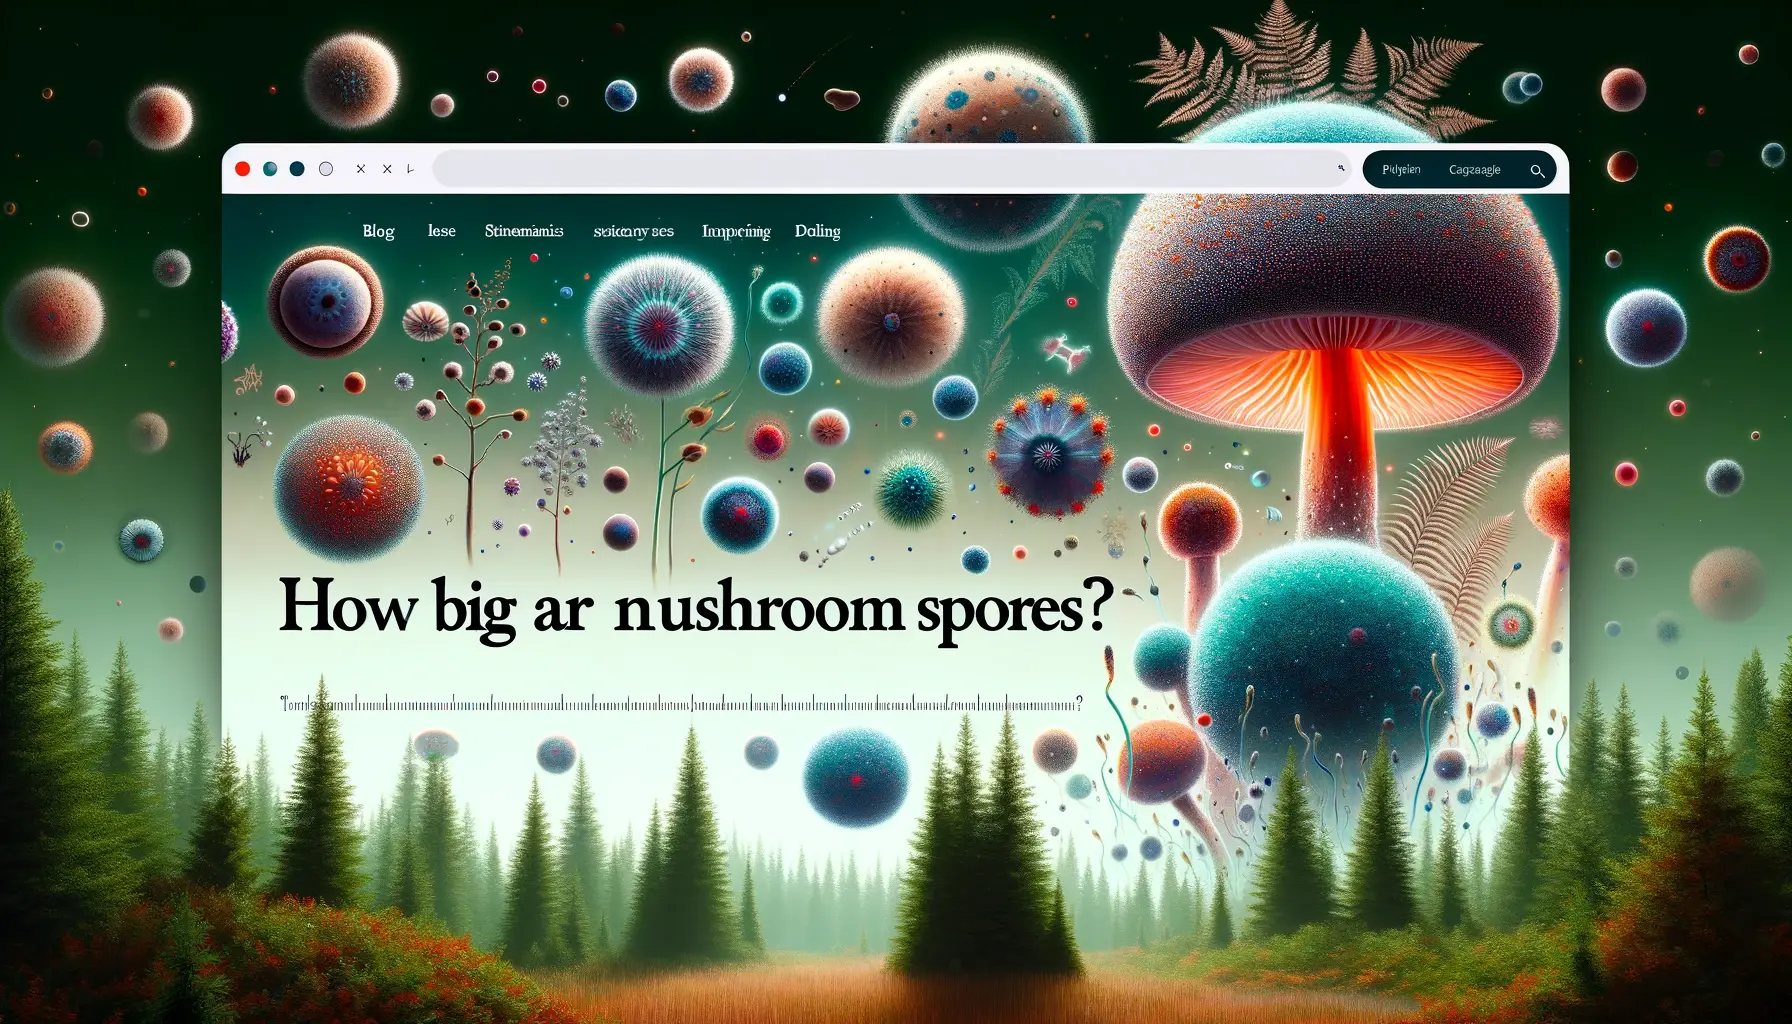 A visually captivating, wide image for a blog header titled 'How Big Are Mushroom Spores?' featuring an artistic interpretation of mushroom spores magnified against a backdrop of a dense forest. The spores are depicted in various sizes, from minuscule to slightly larger, floating ethereally above the forest floor. The image combines elements of mystery and science, with spores illustrated in vivid colors to stand out against the green and brown hues of the forest. The title of the blog is elegantly placed in the top or bottom third of the image, ensuring it does not detract from the artwork itself.